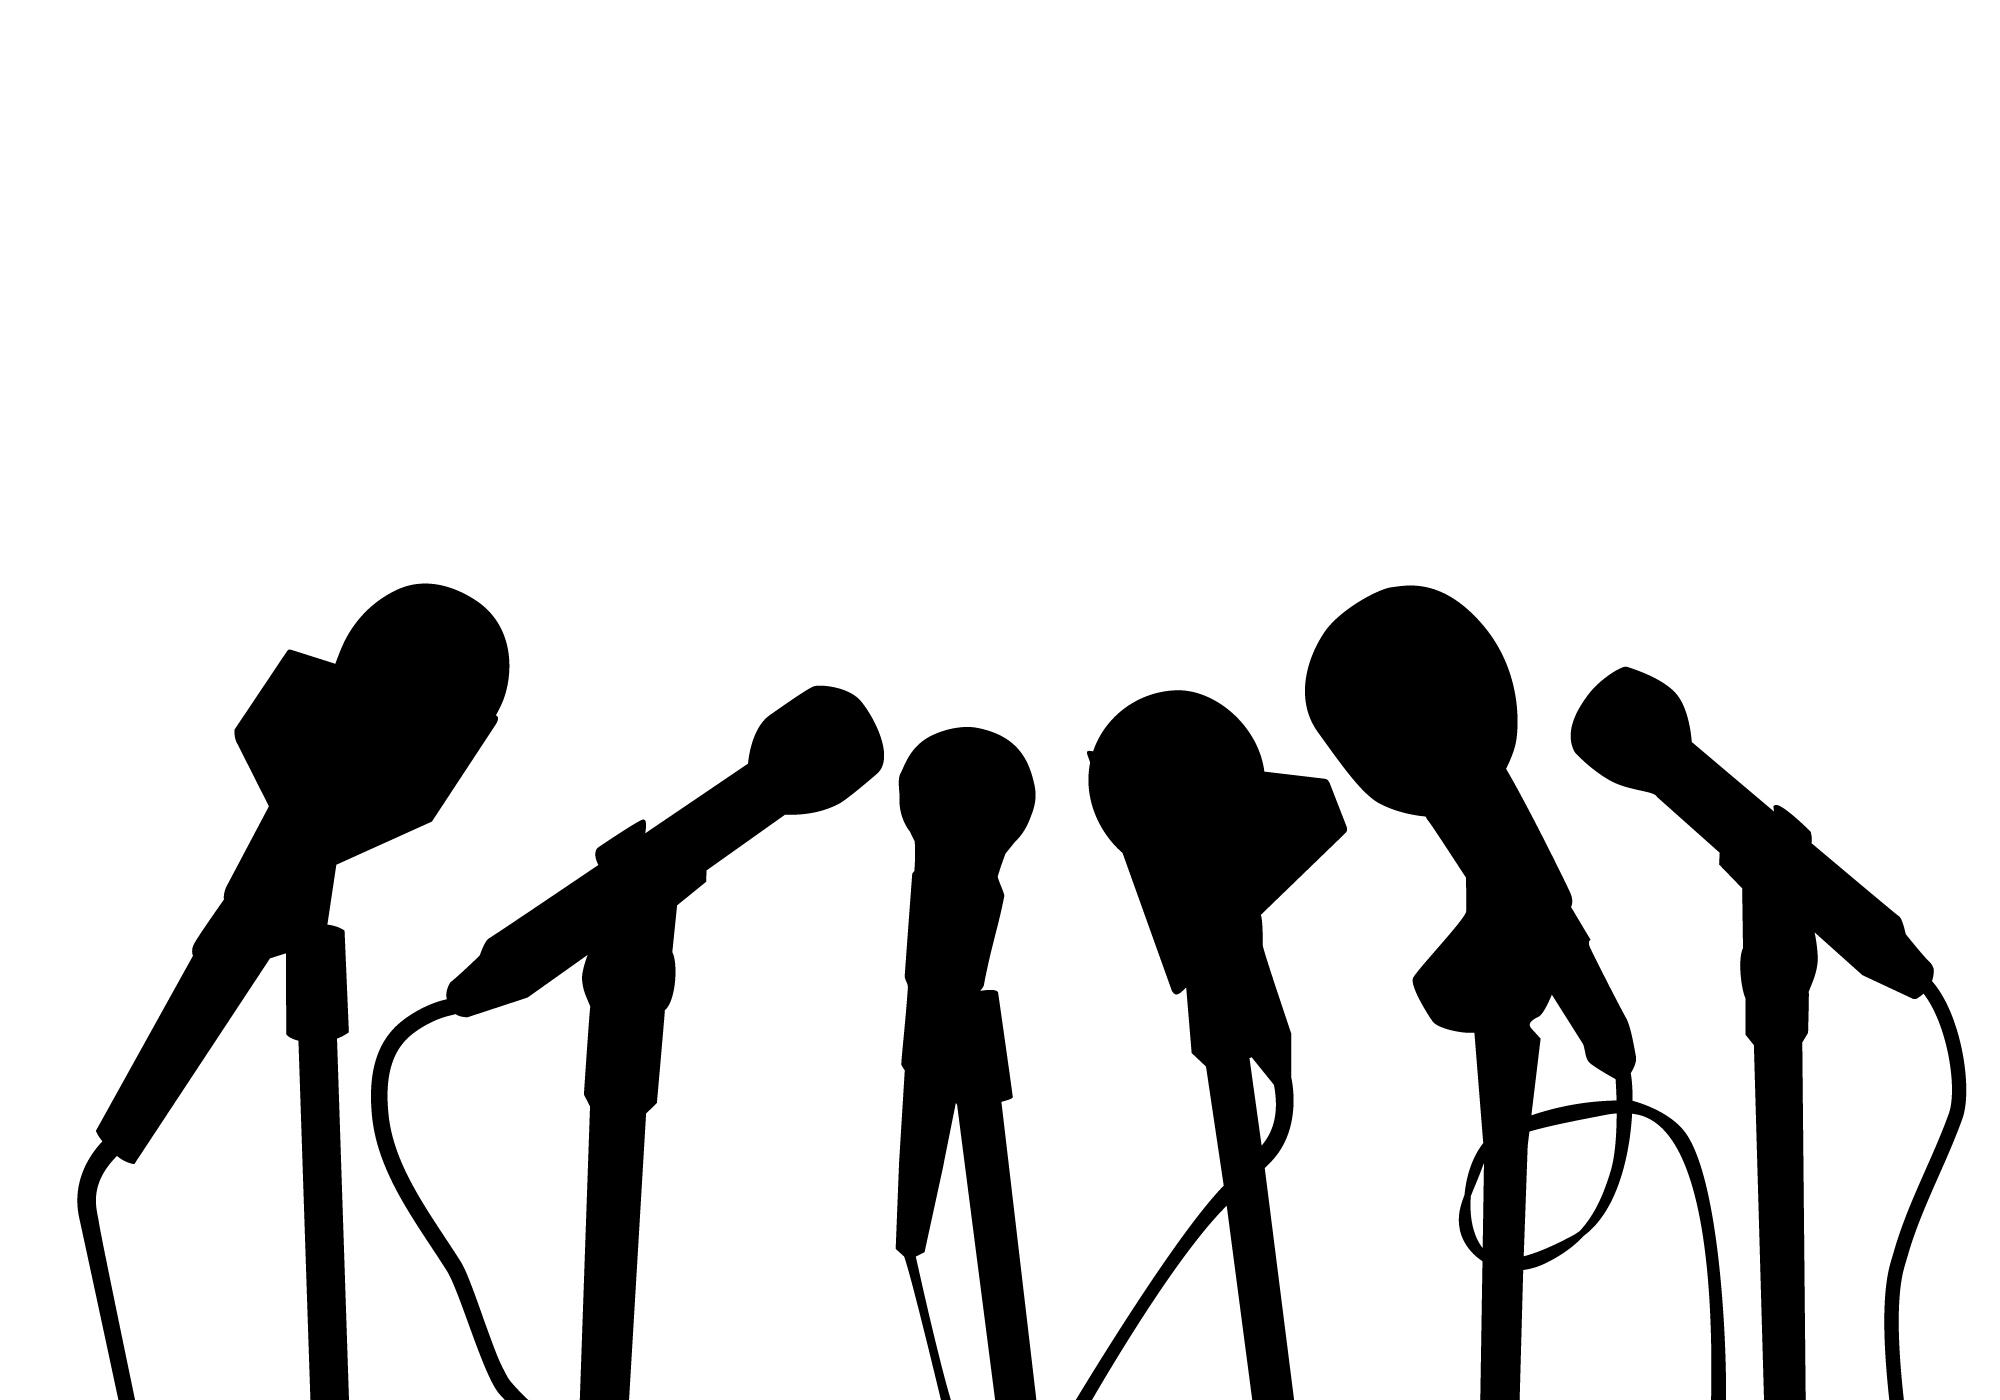 conference clipart news conference